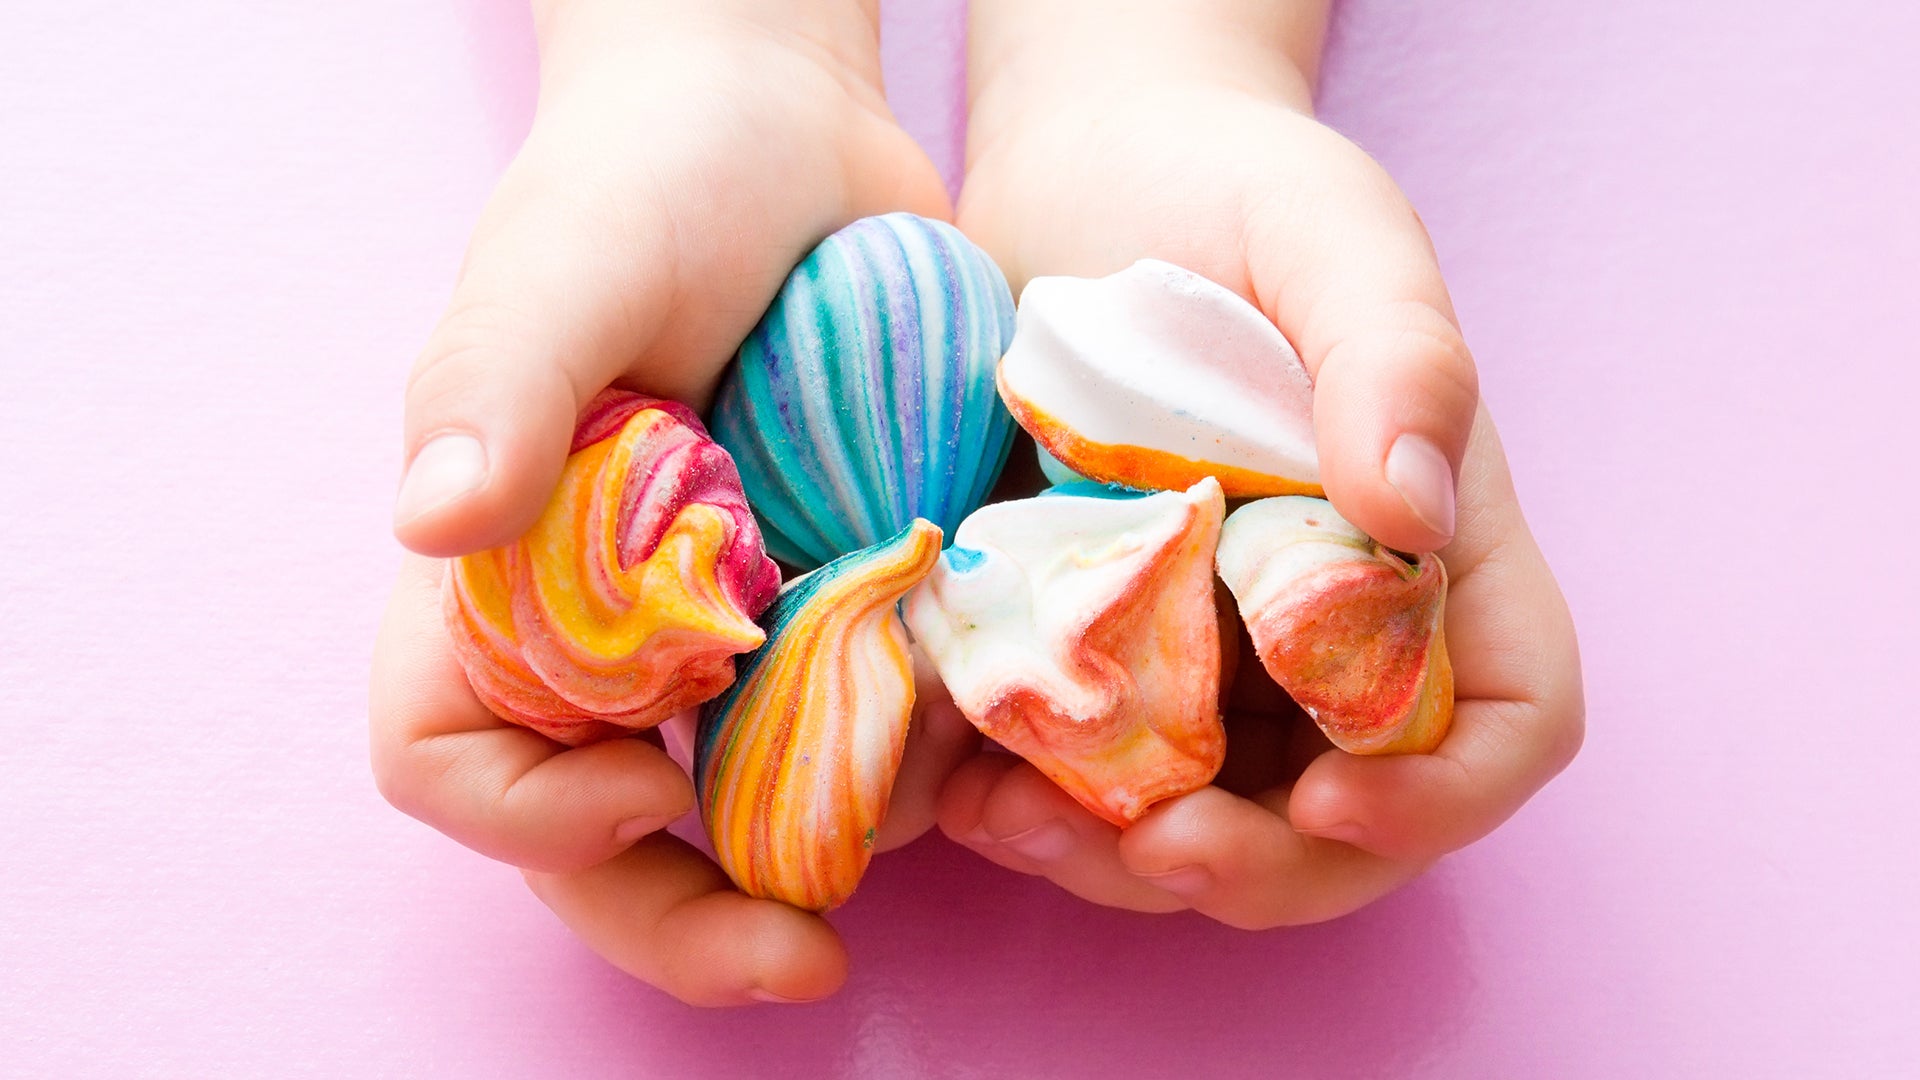 Colourful meringues in hands